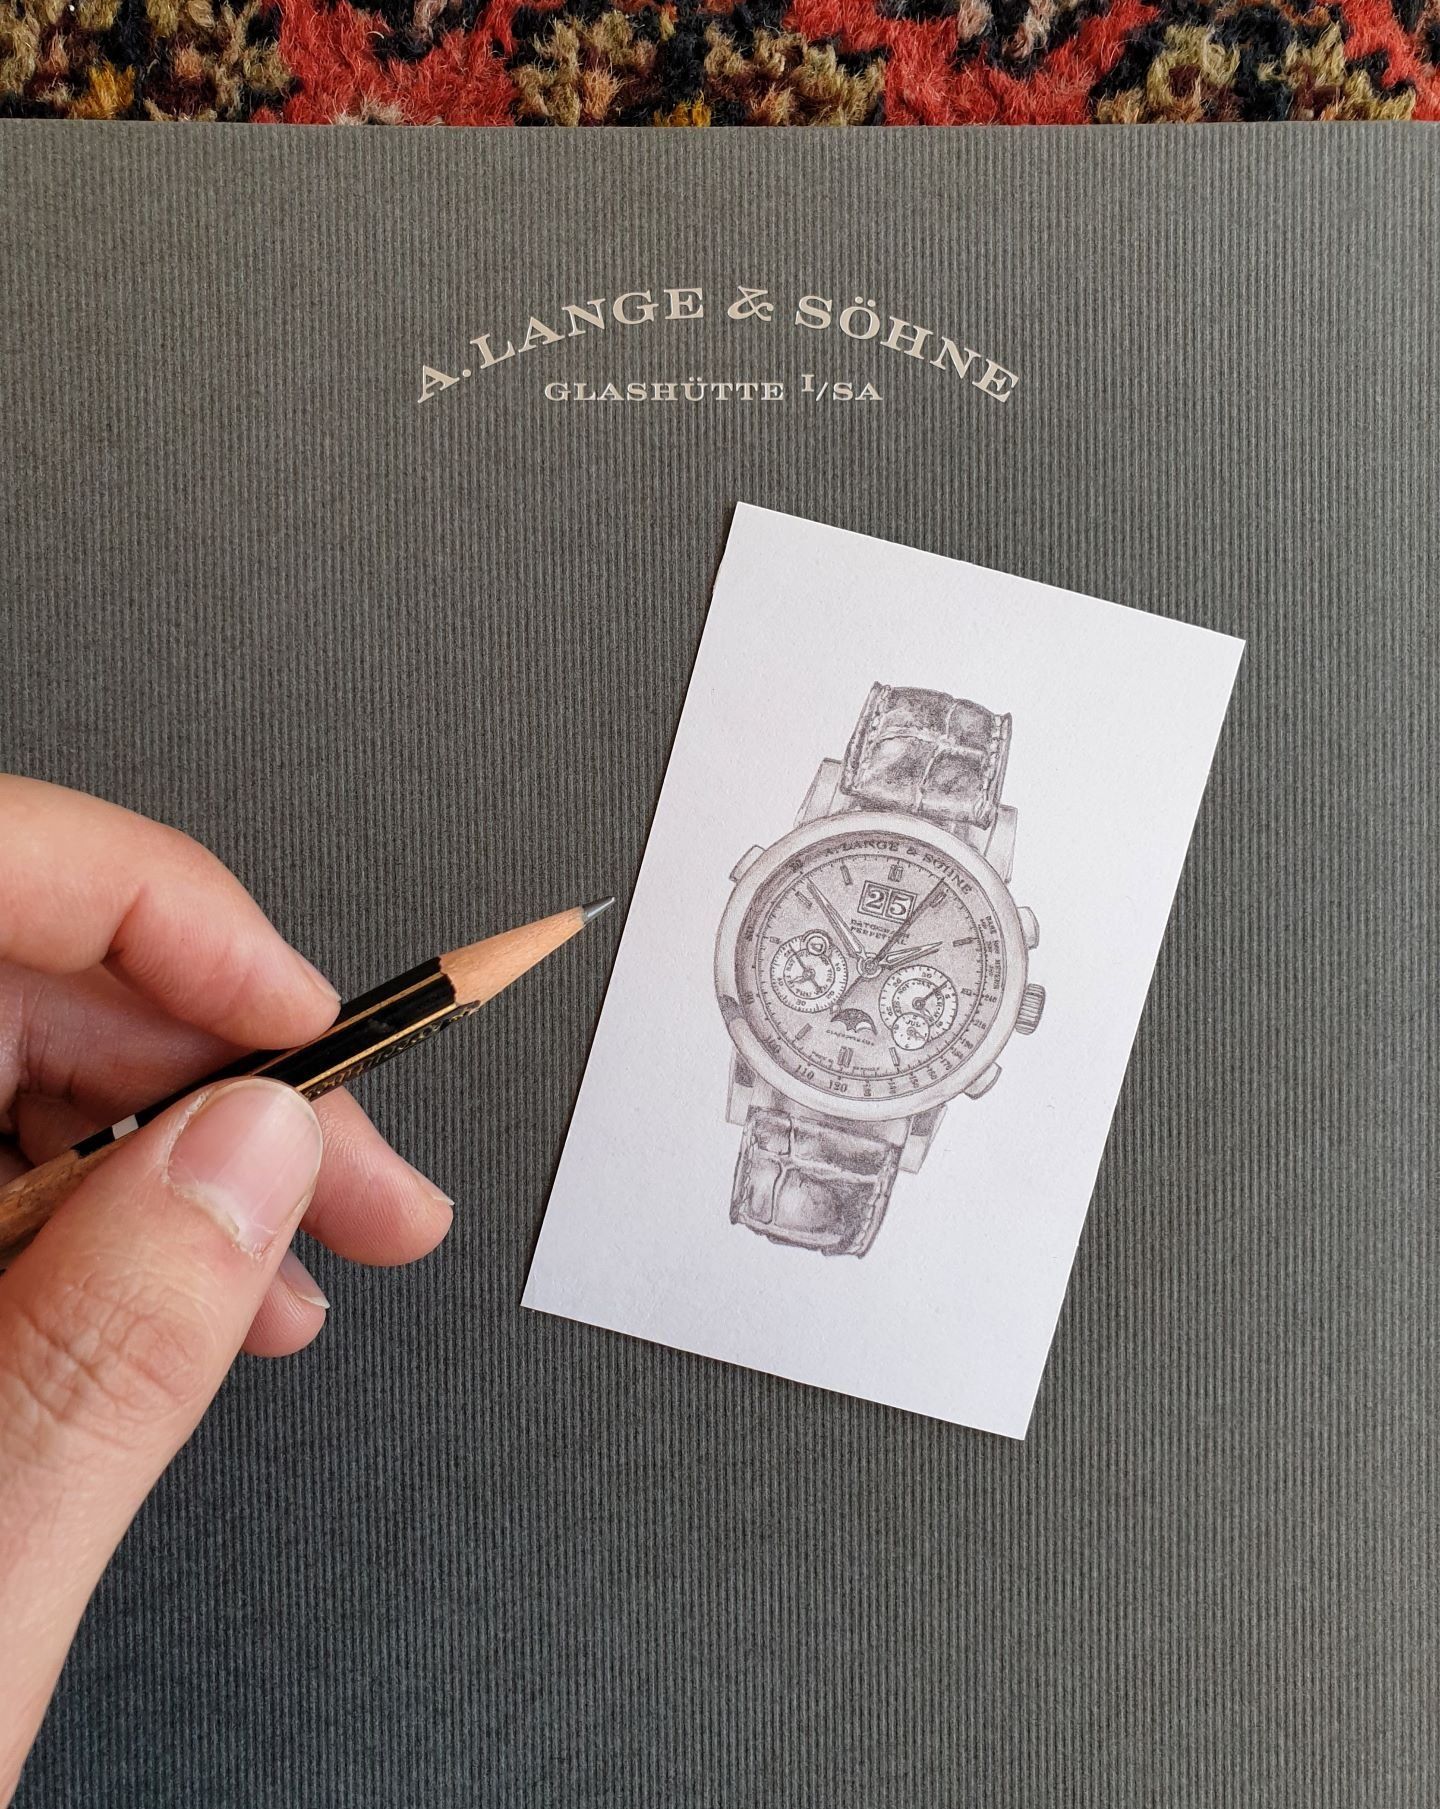 A pencil sketch of the A. Lange & Söhne Datograph Perpetual timepiece in 1:1 scale